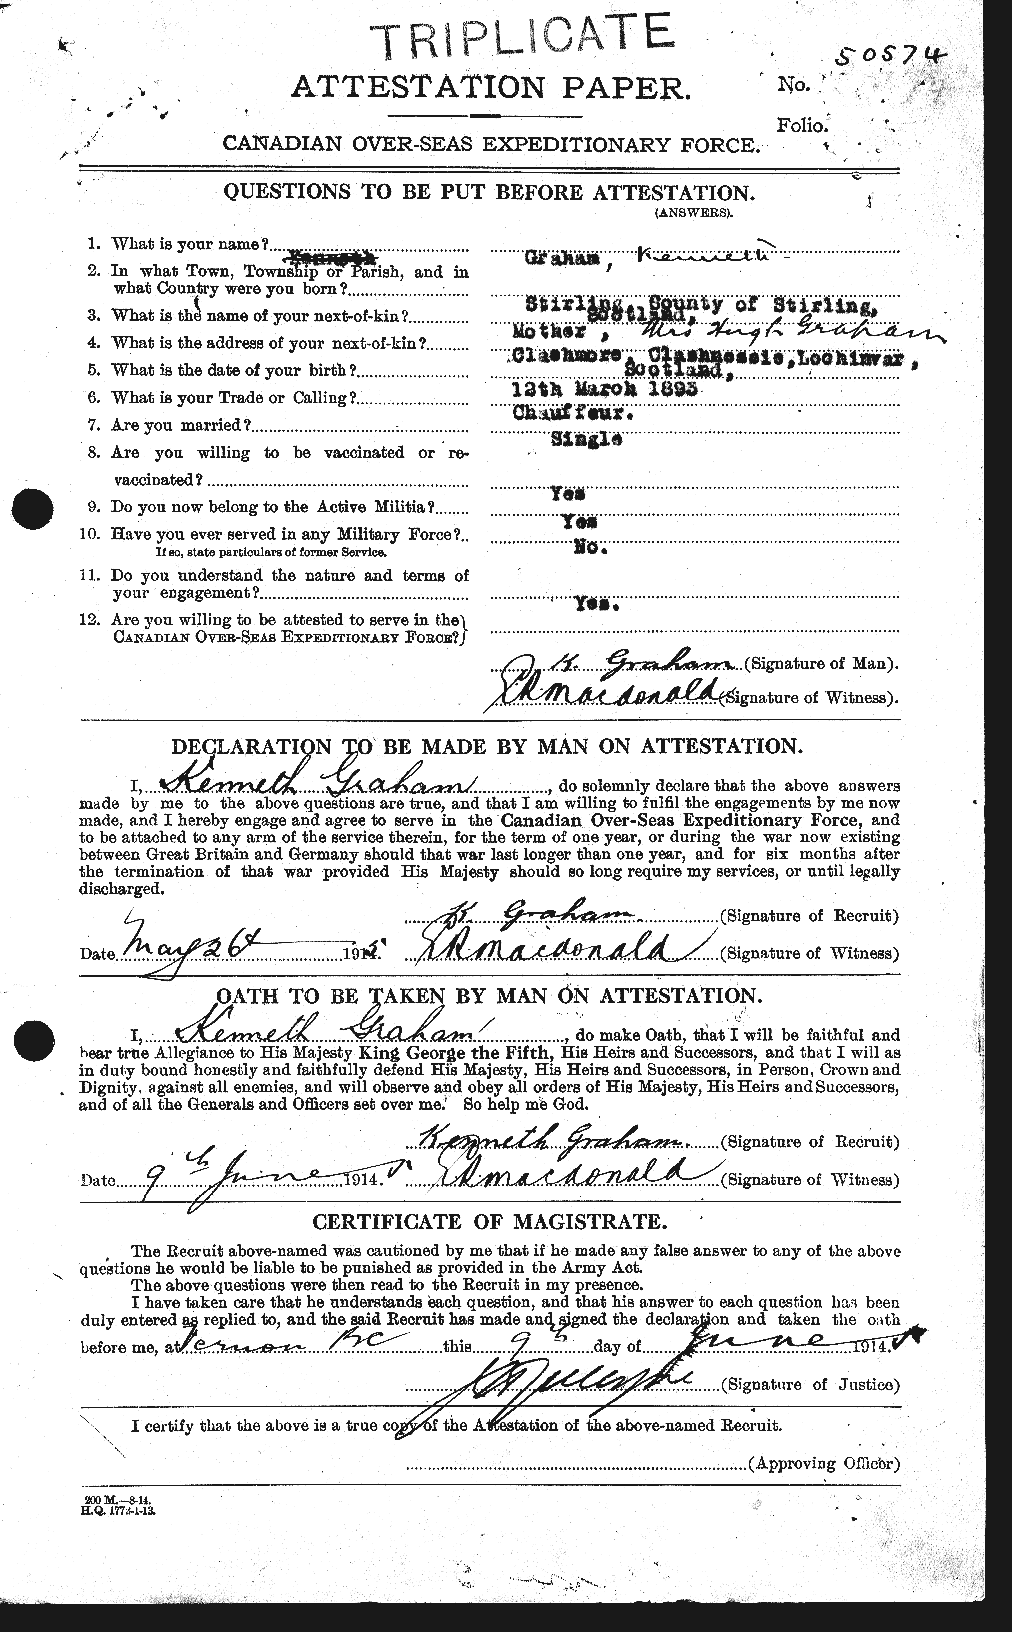 Personnel Records of the First World War - CEF 359257a